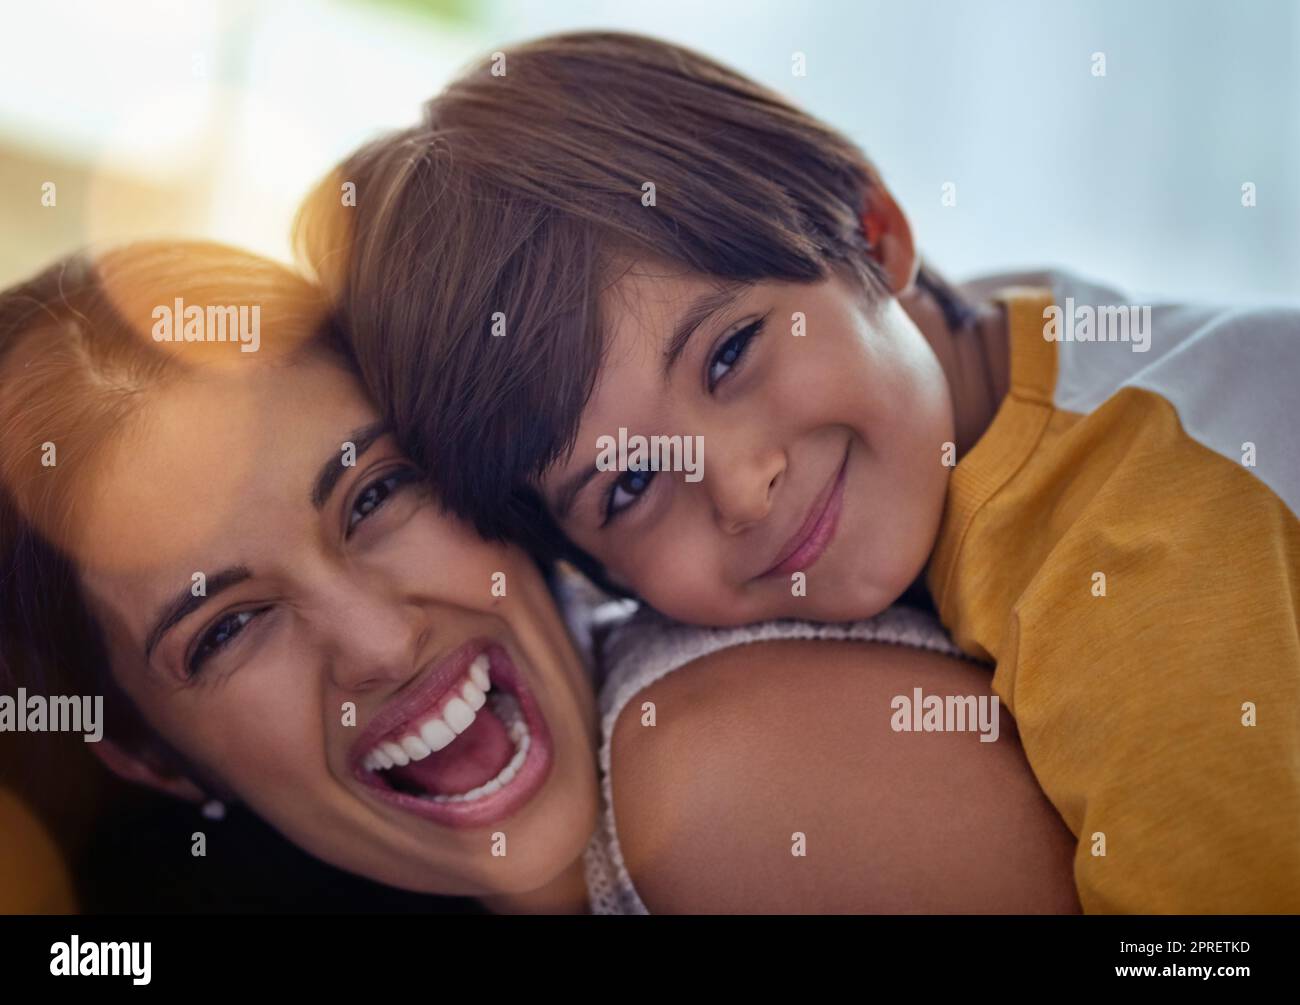 Nothing quite as endearing as the love of a mom. an adorable little boy affectionately hugging his mother at home. Stock Photo